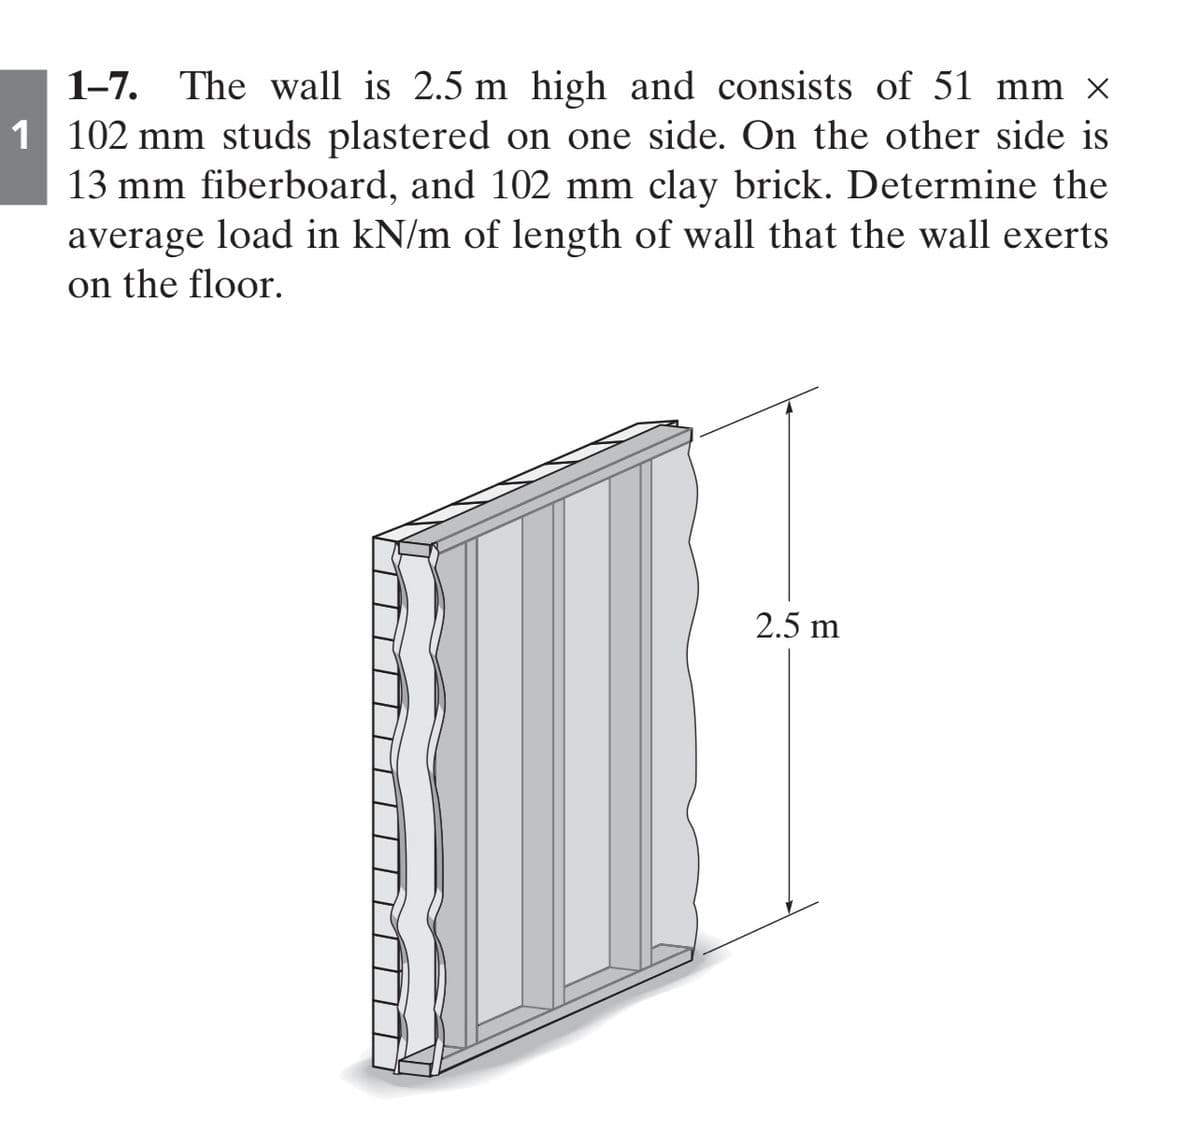 1-7. The wall is 2.5 m high and consists of 51 mm ×
1 102 mm studs plastered on one side. On the other side is
13 mm fiberboard, and 102 mm clay brick. Determine the
average load in kN/m of length of wall that the wall exerts
on the floor.
2.5 m
